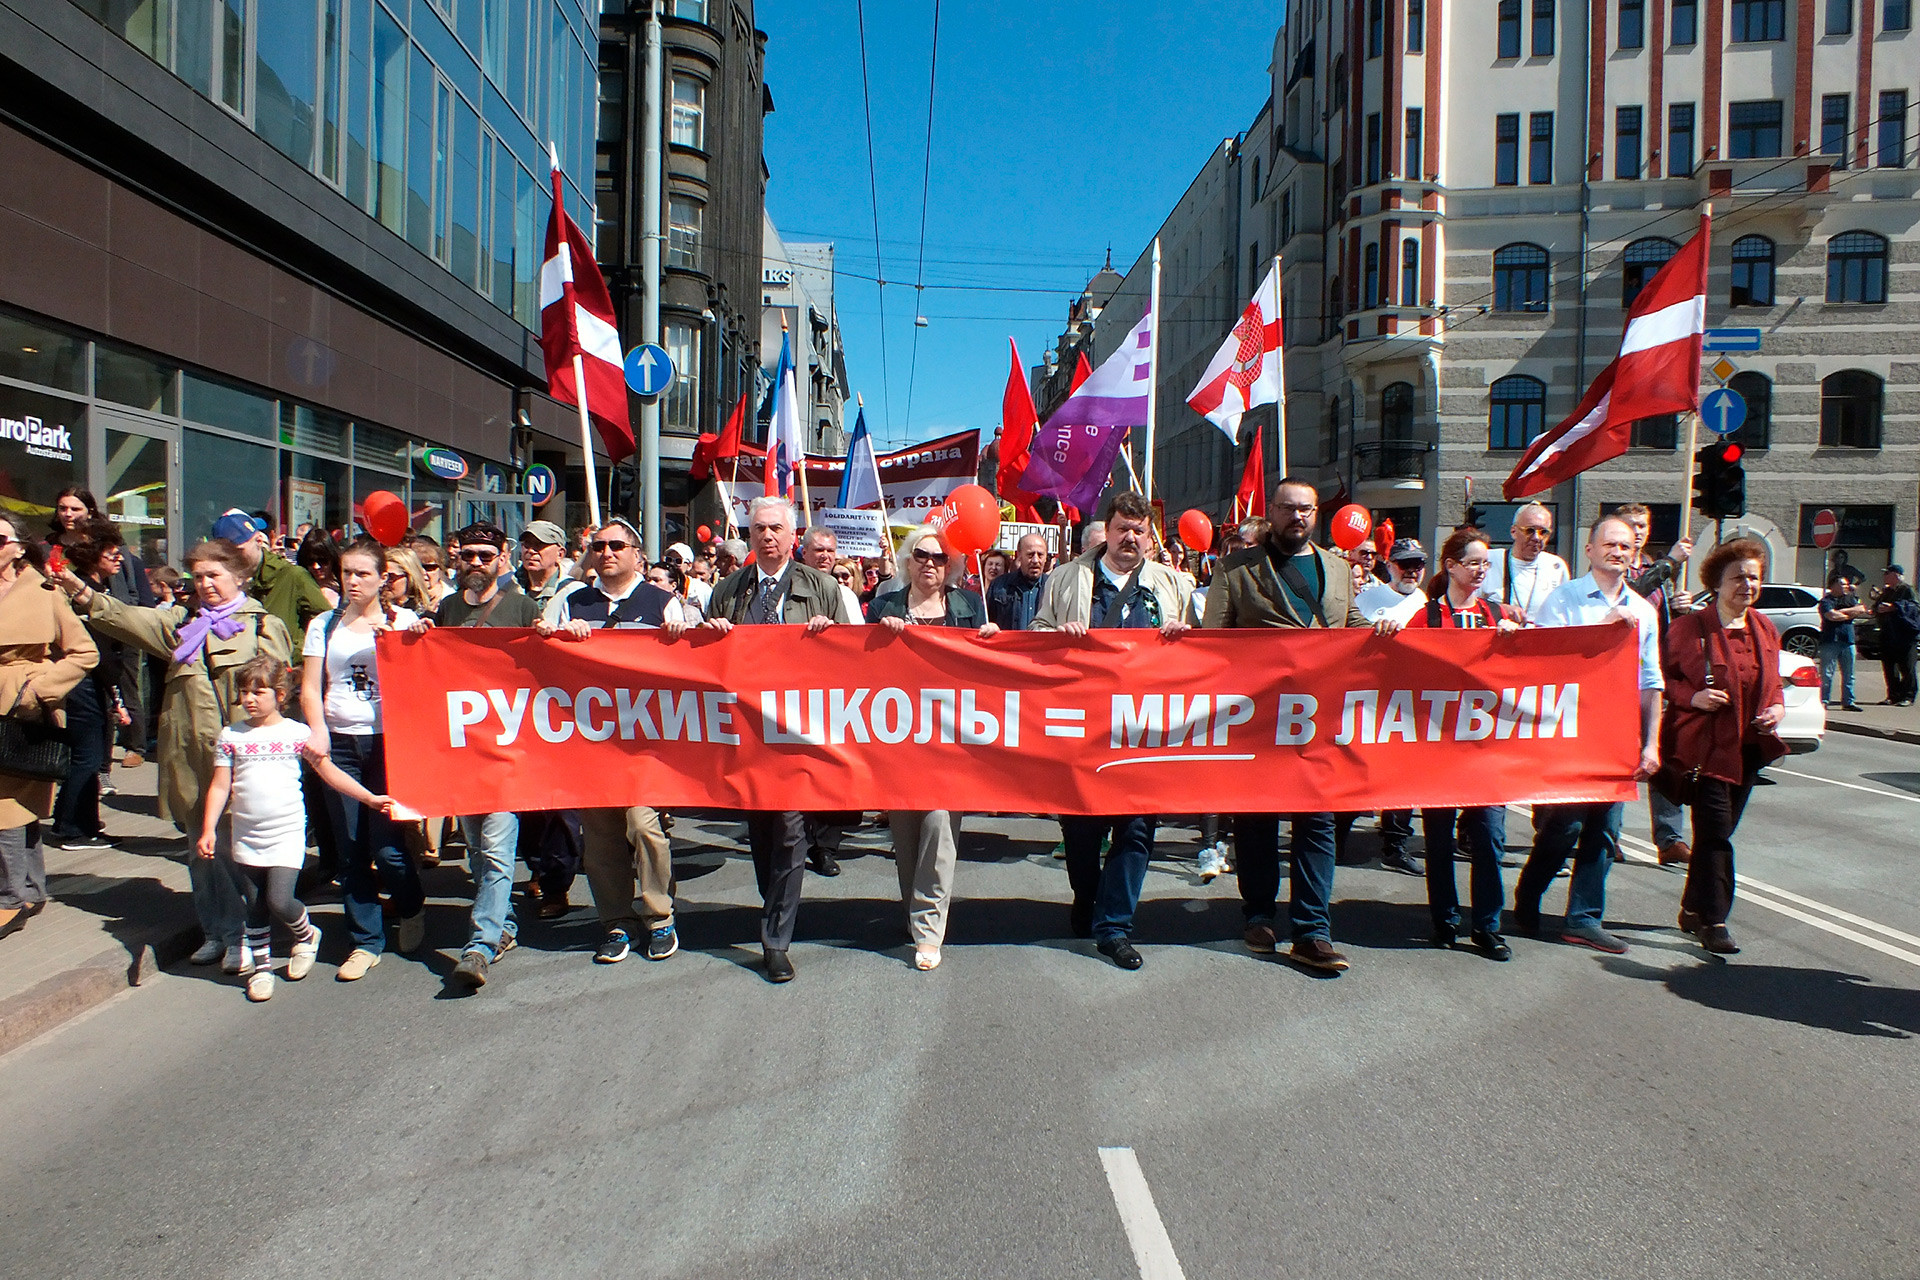 Participants of the rally in Riga (May 1, 2018) oppose the full translation of school education into Latvian and the 